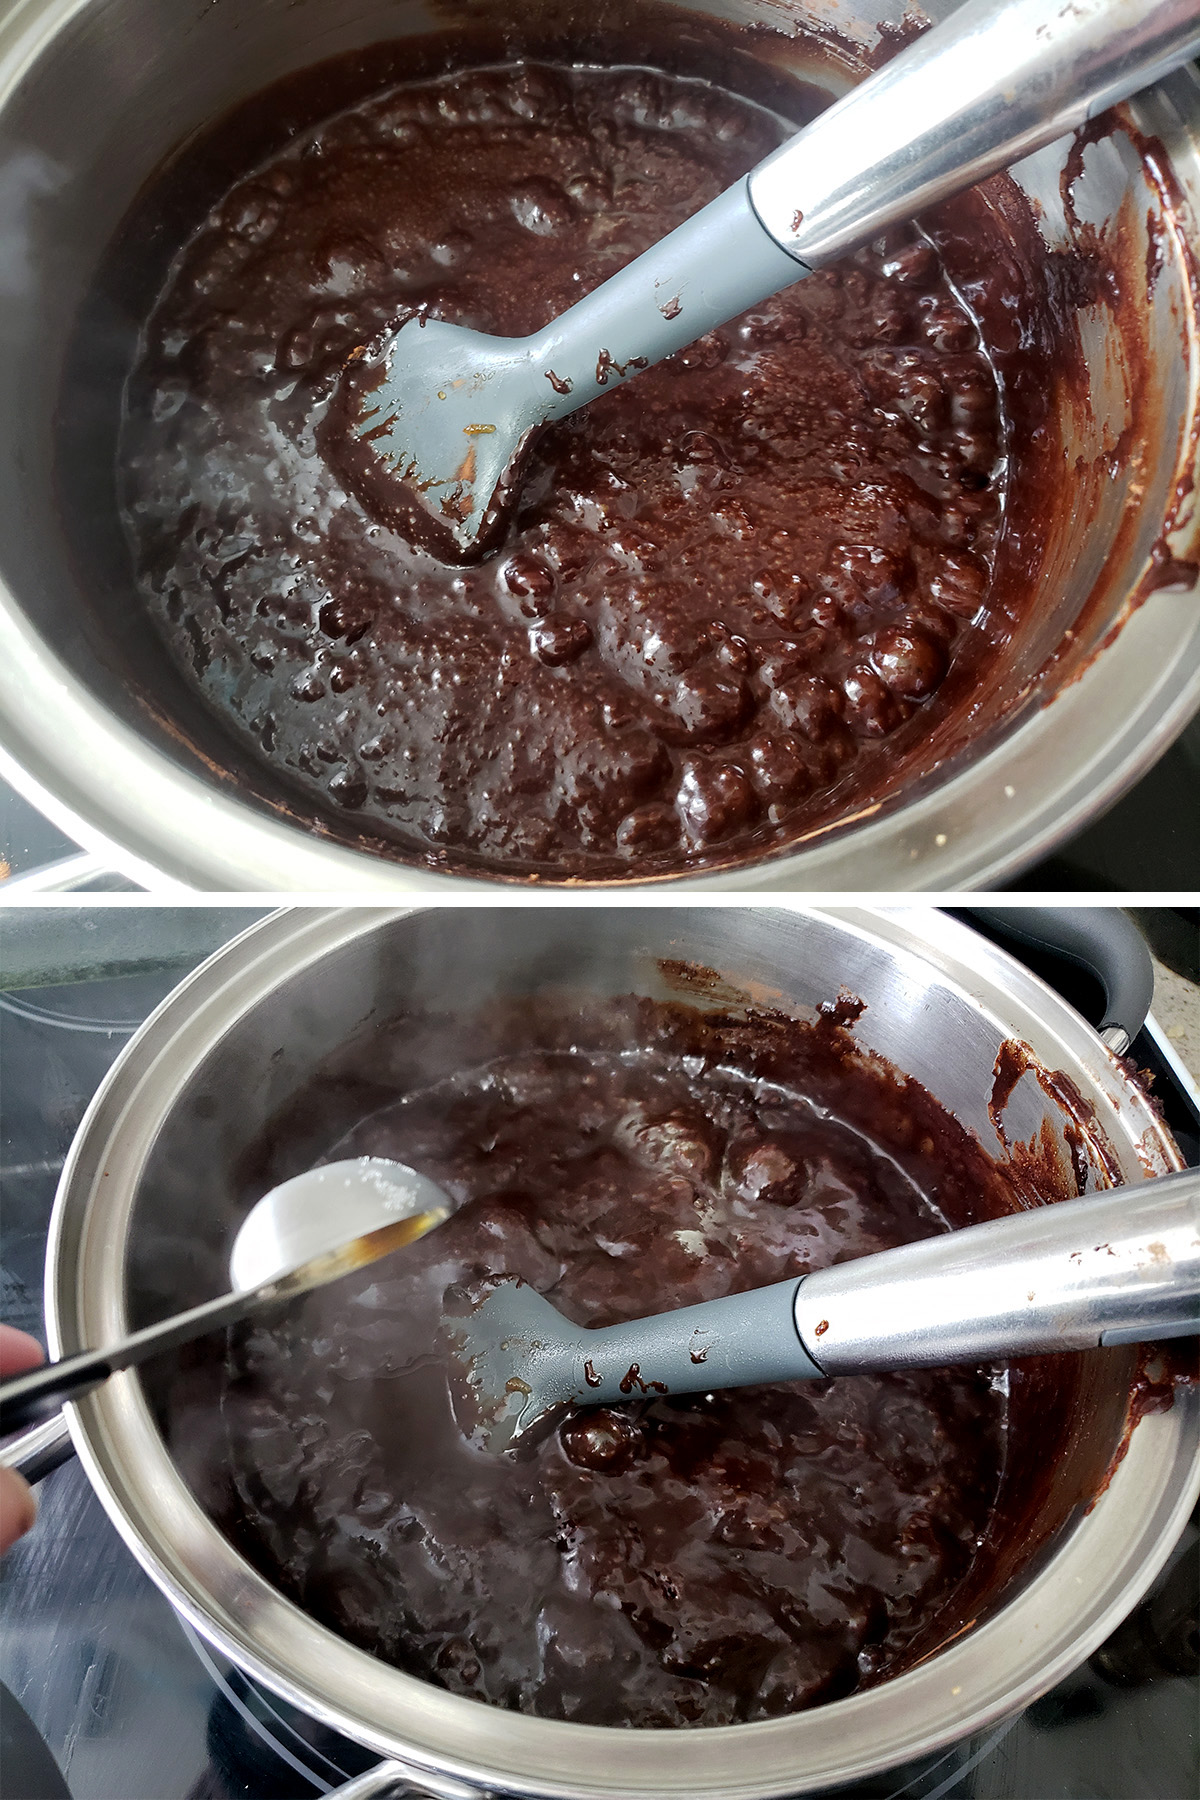 A two part image showing the chocolate caramel being cooked, and the vanilla extract being added